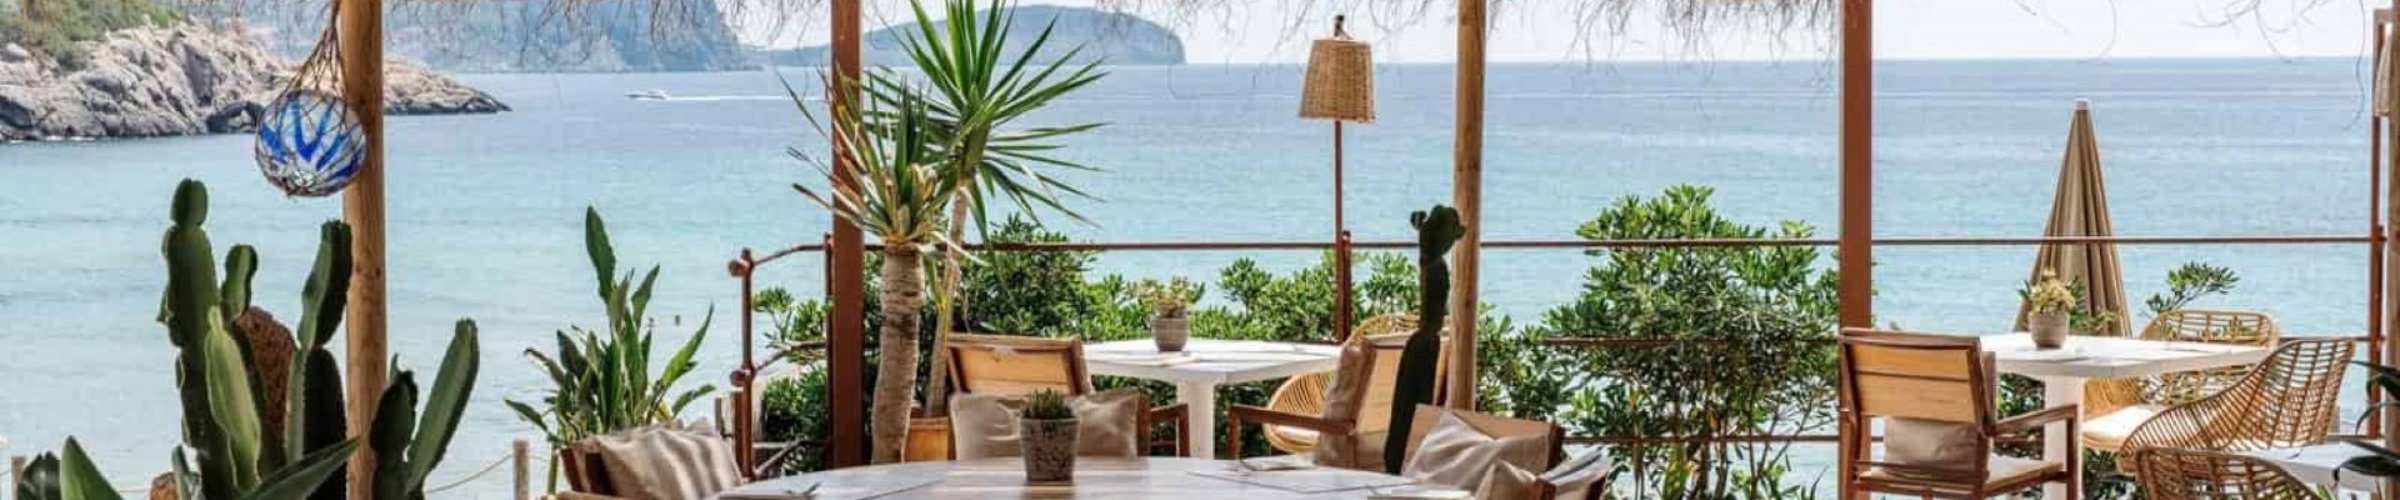 5 of the best Traditional restaurants in Ibiza